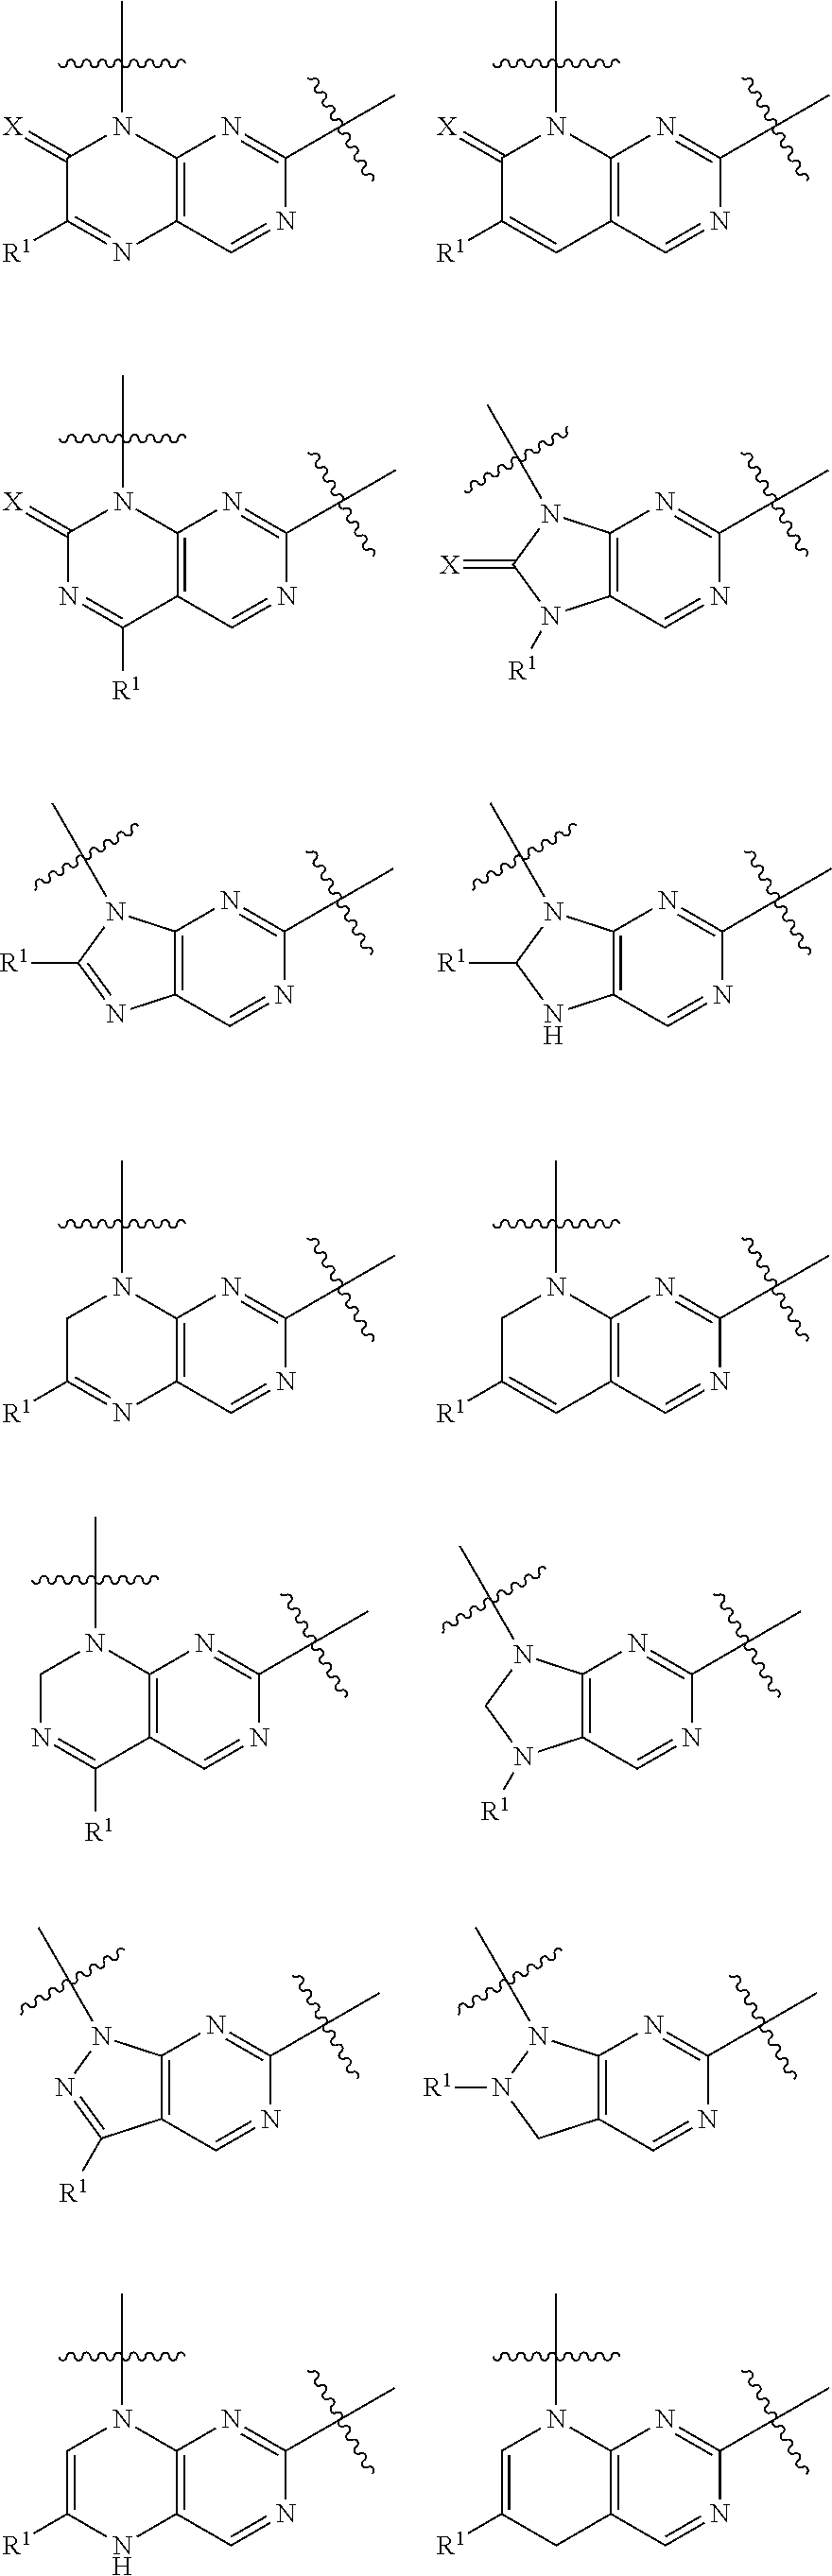 Pteridine ketone derivative and applications thereof as EGFR, BLK, and FLT3 inhibitor